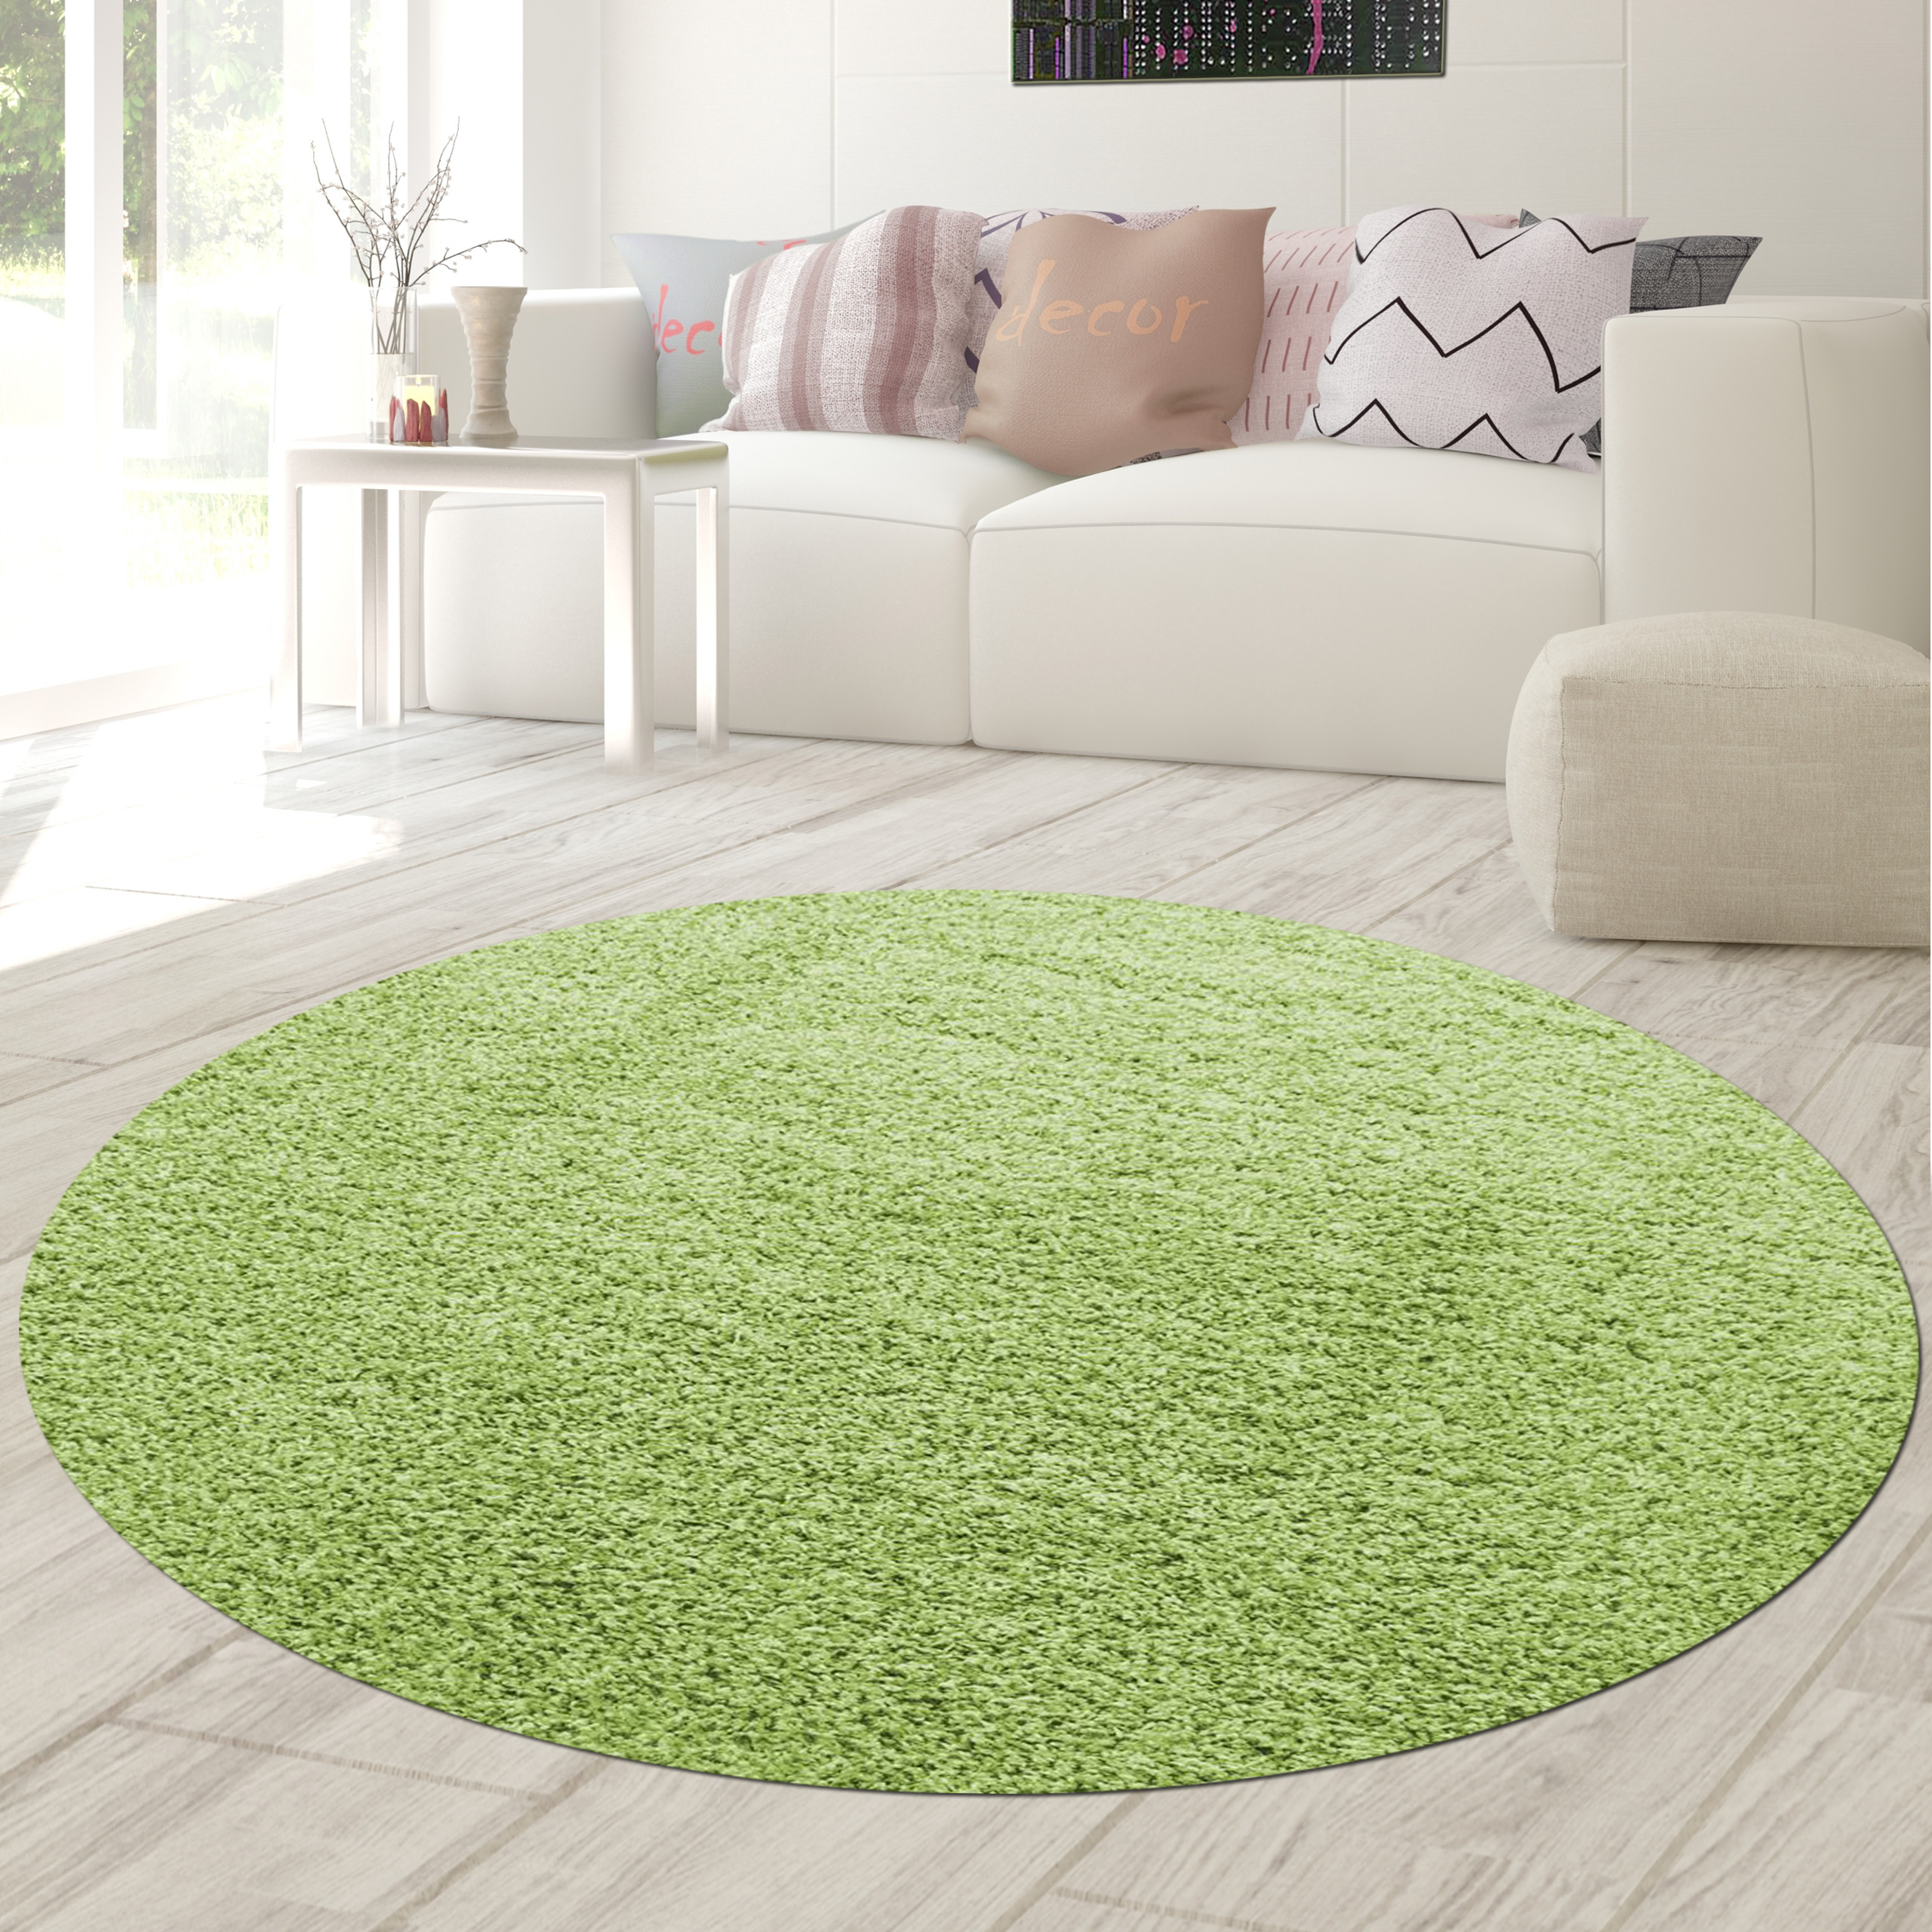 Shag carpet gr (approx) overall weight height free 100% m² emission 2.2 / frisee, Teppich-Traum - polypropylenes 30mm Merilon Total (approx)